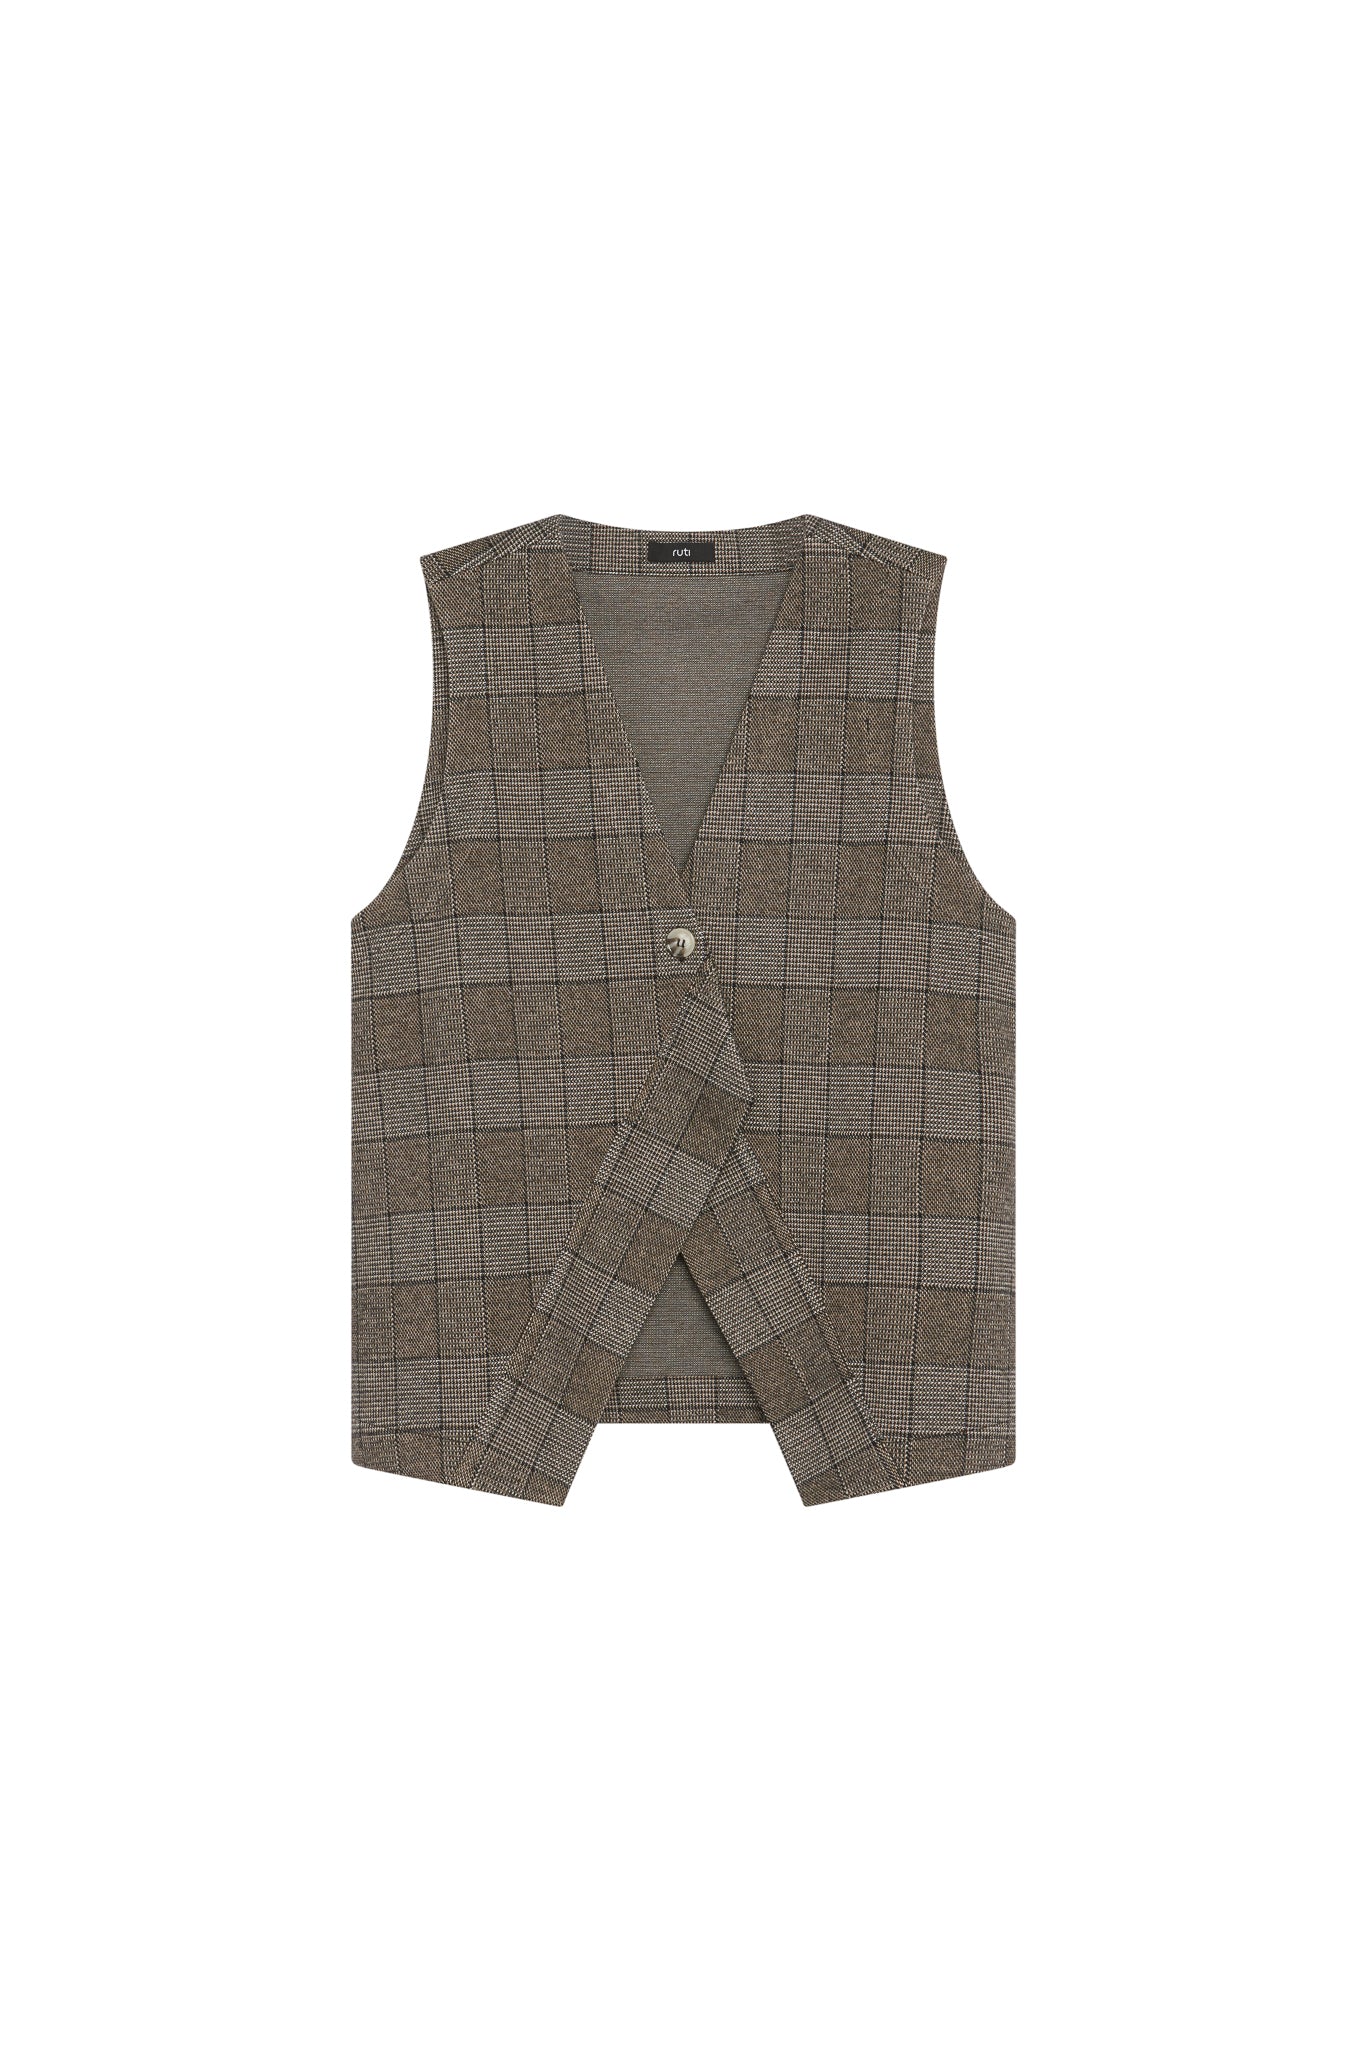 In Command Tailored Vest